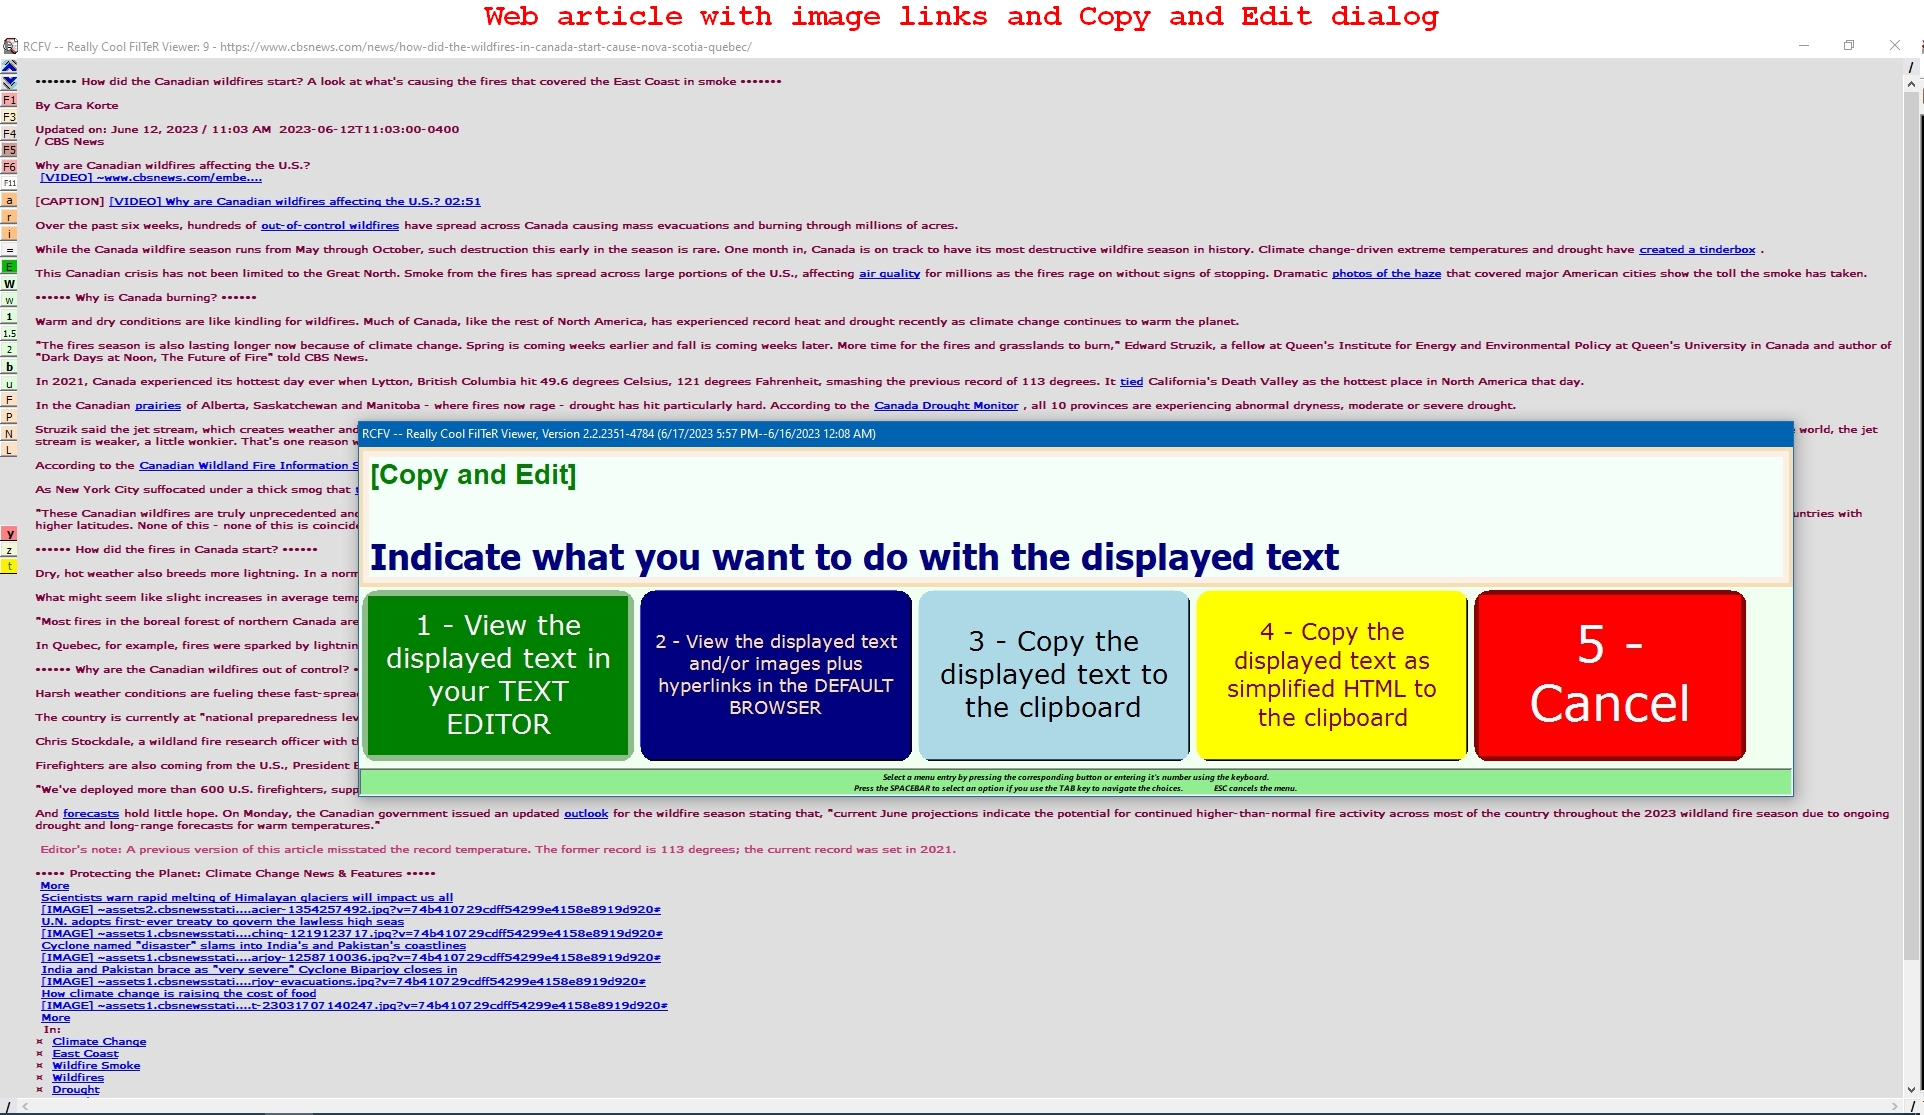 Web Article With Image Links And Copy and Edit Dialog